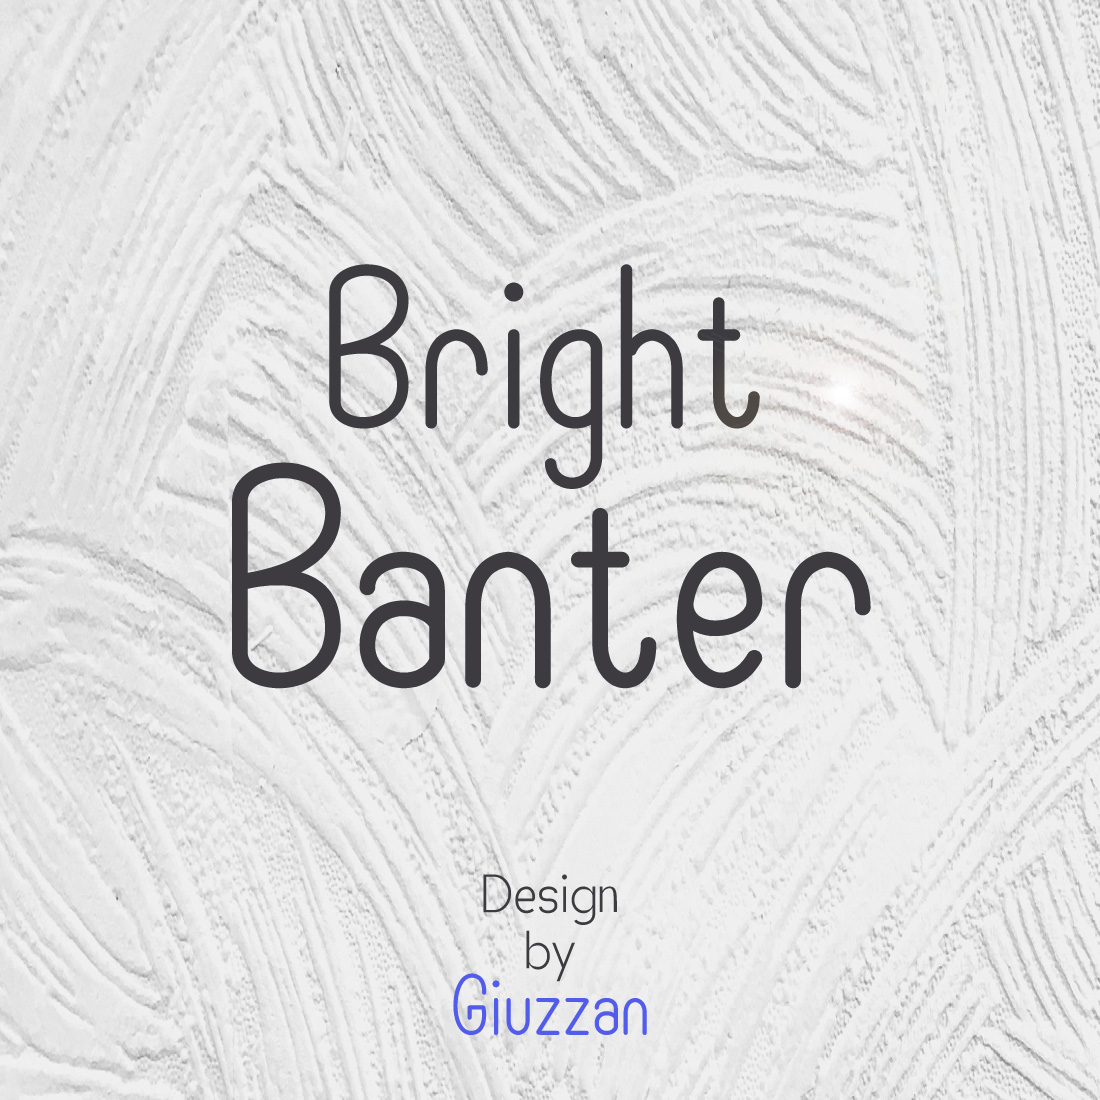 Bright Banter cover image.